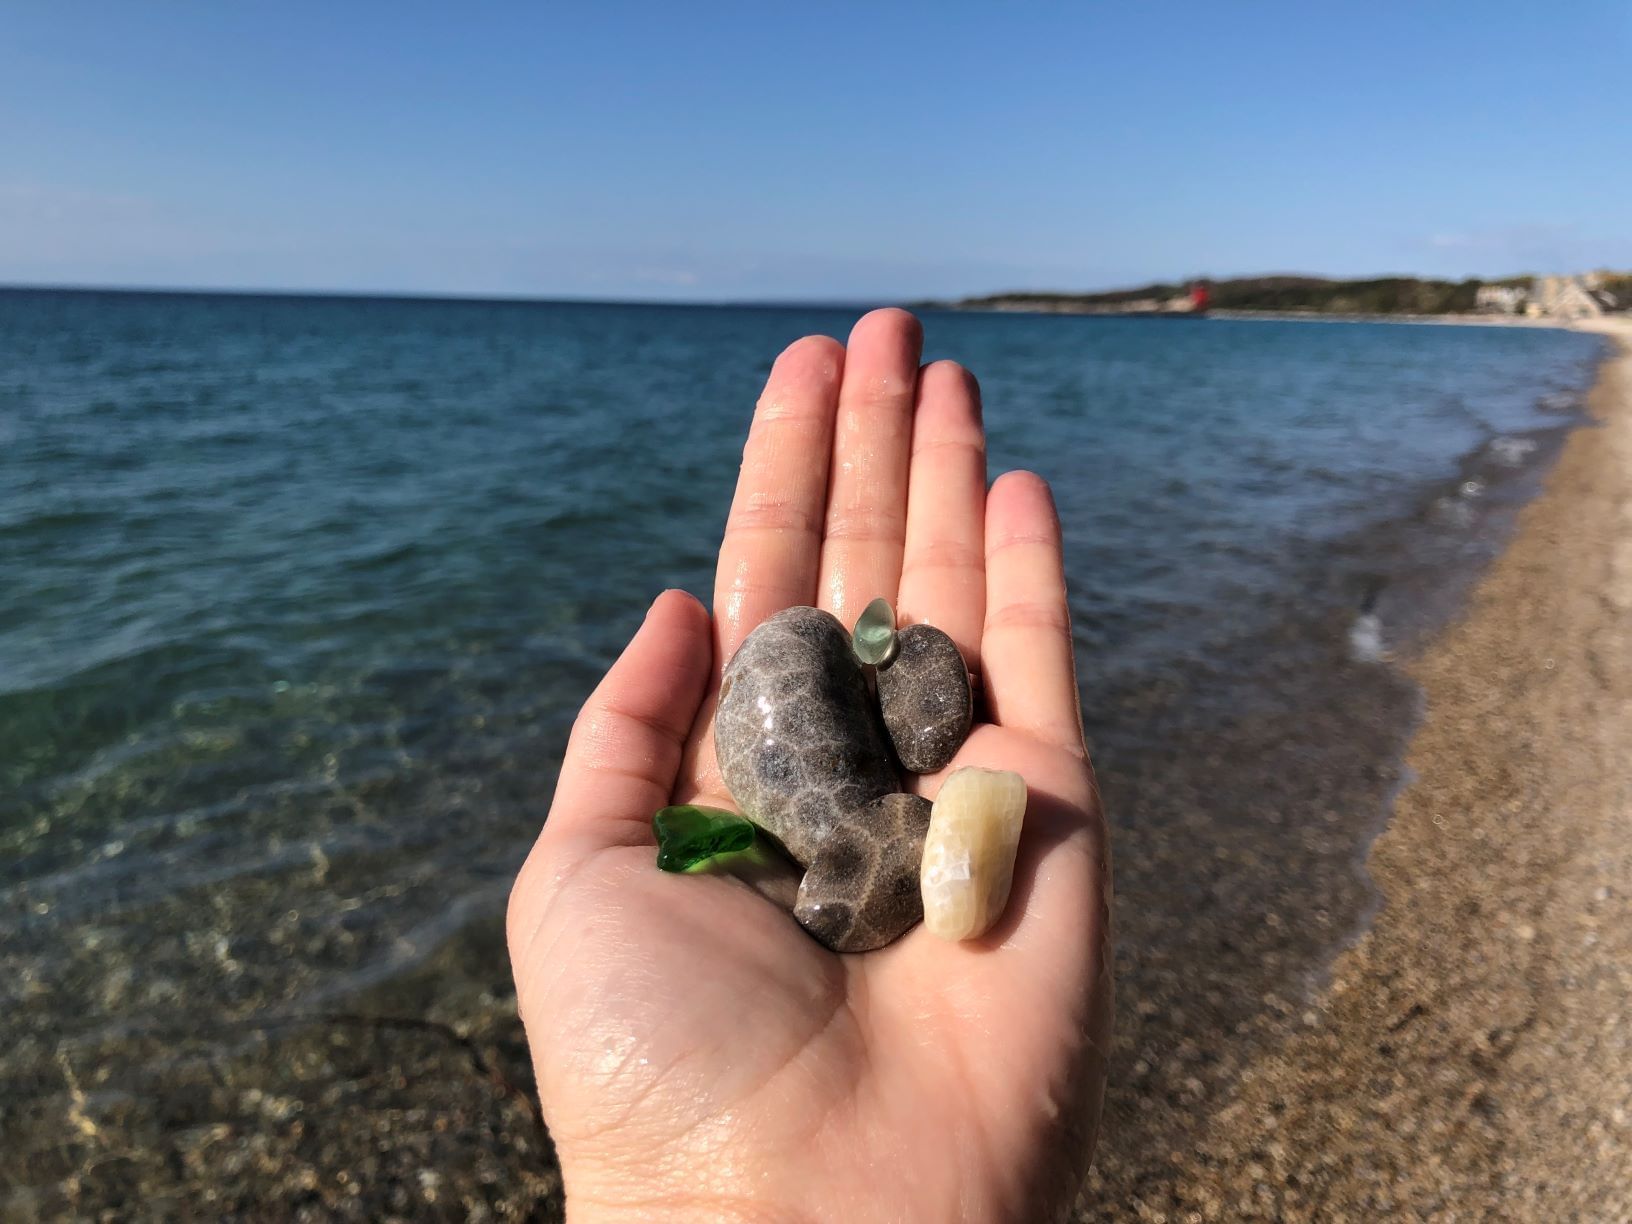 Petoskey stone hunting in Charlevoix